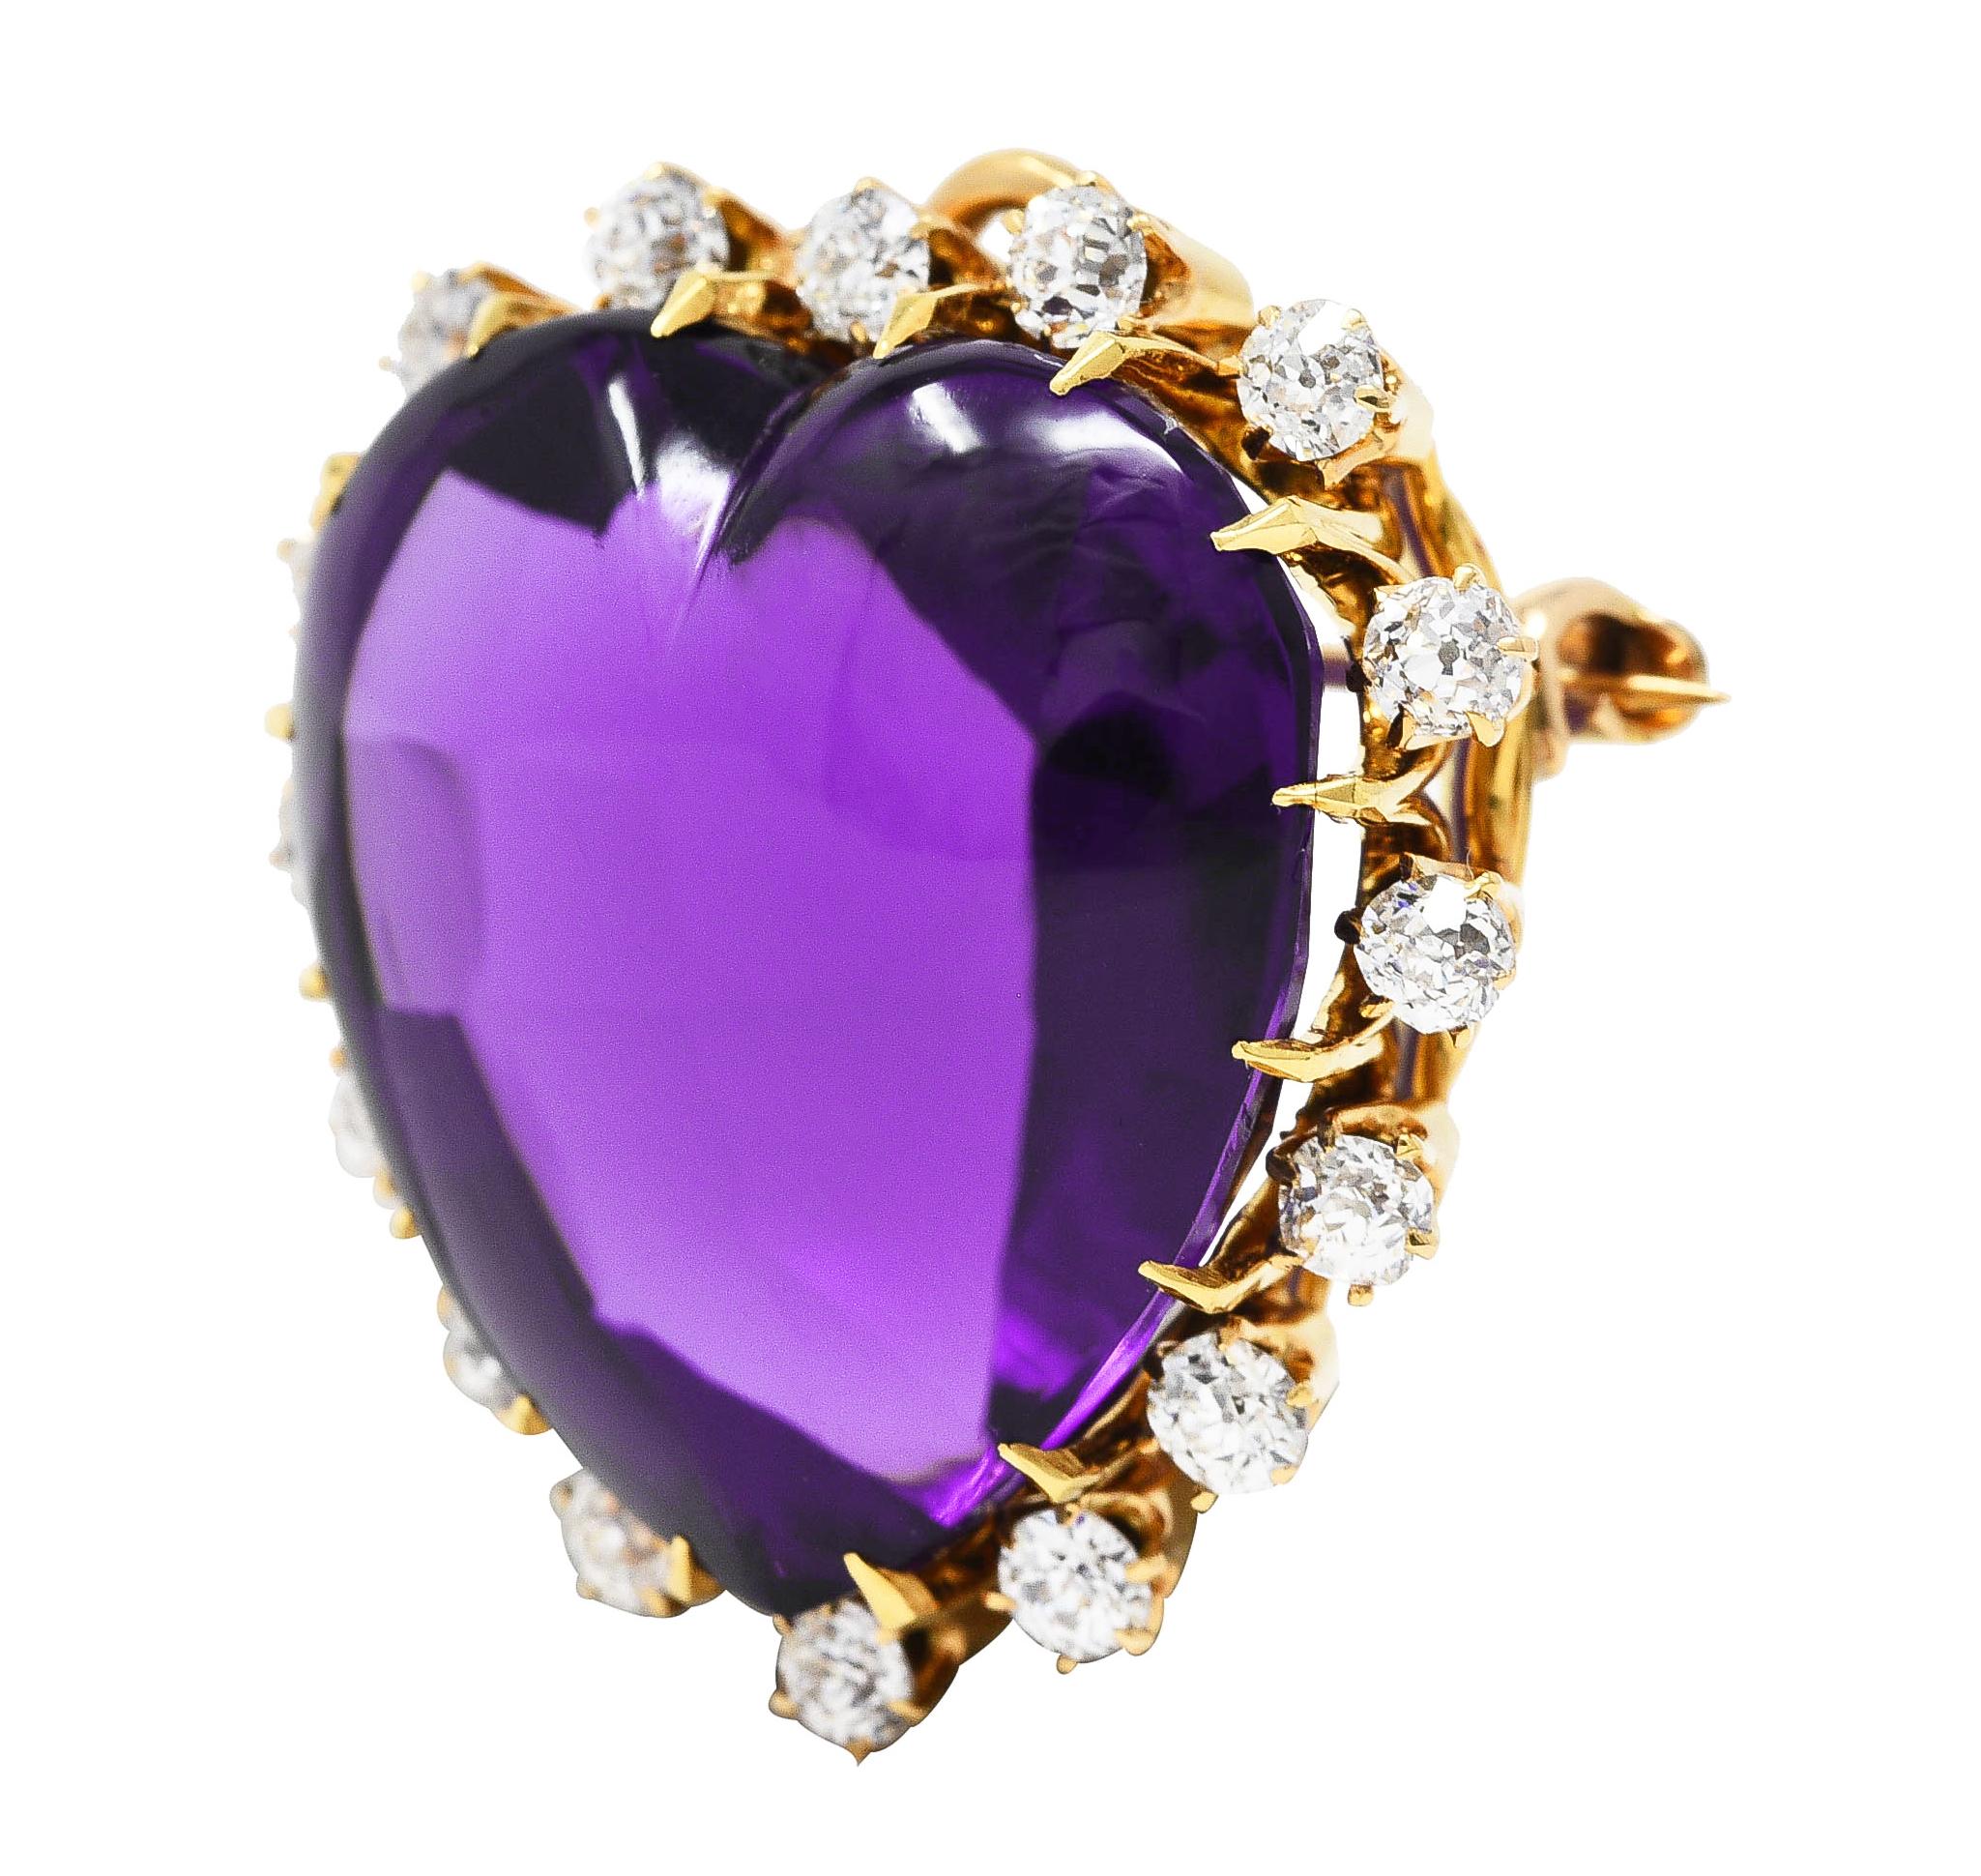 Centering a 20.0 mm heart shaped amethyst cabochon - transparent dark purple in color. Set with talon prongs and featuring a halo surround of old mine cut diamonds. Weighing approximately 0.96 carat total - H/I color with VS2 clarity. Prong set